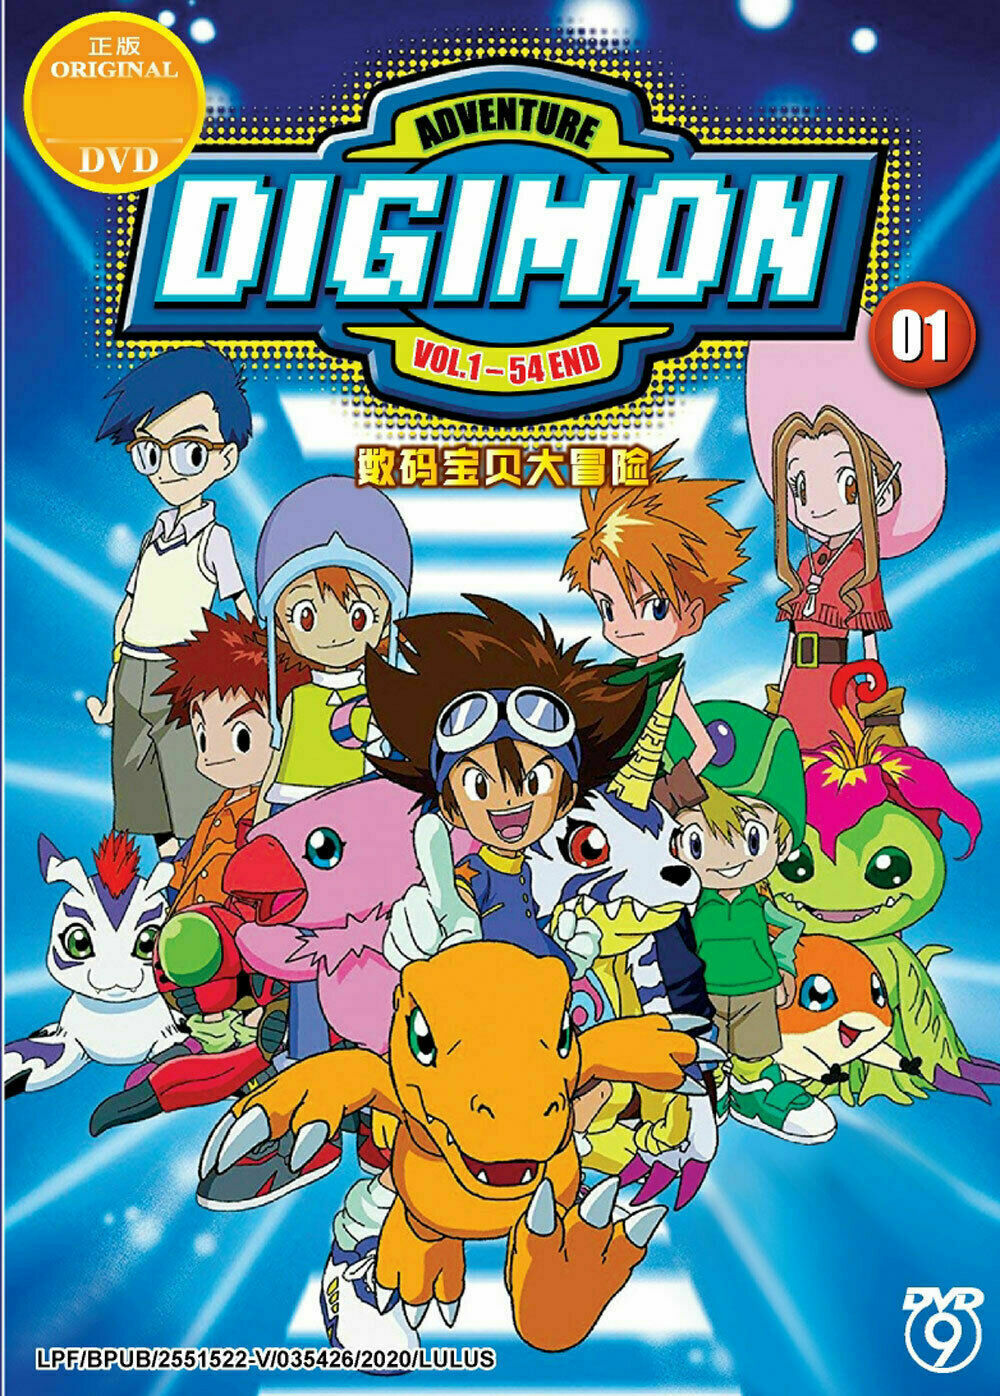 Digimon Adventure 01 Vol.1-54 End English Dubbed DVD ship From USA